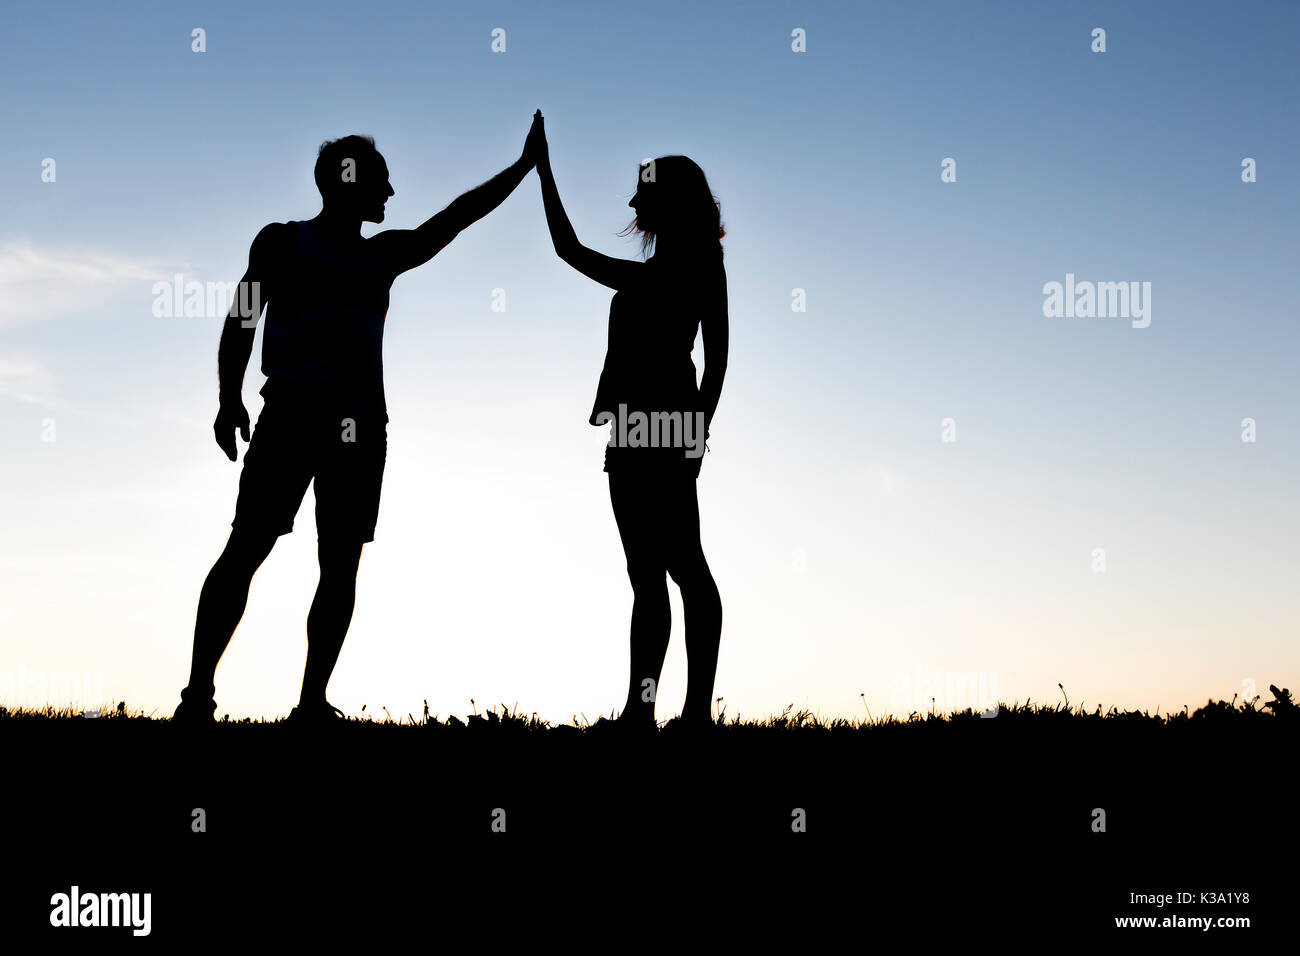 Happy silhouette couple holding up hands against the sky at dusk Stock Photo